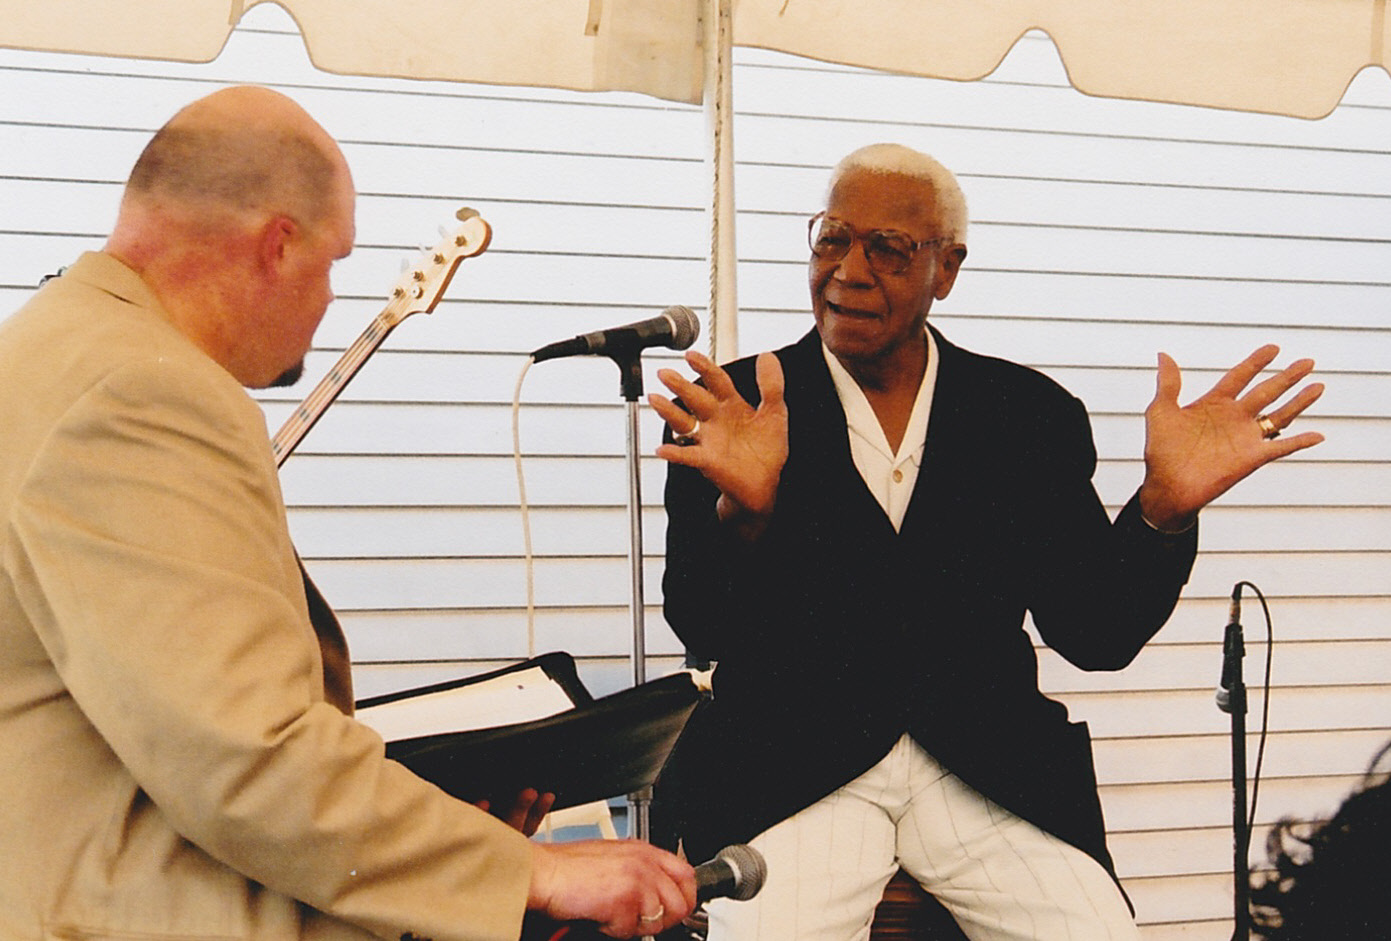 Buck O’Neil shared stories with 2003 Kansas City conference attendees